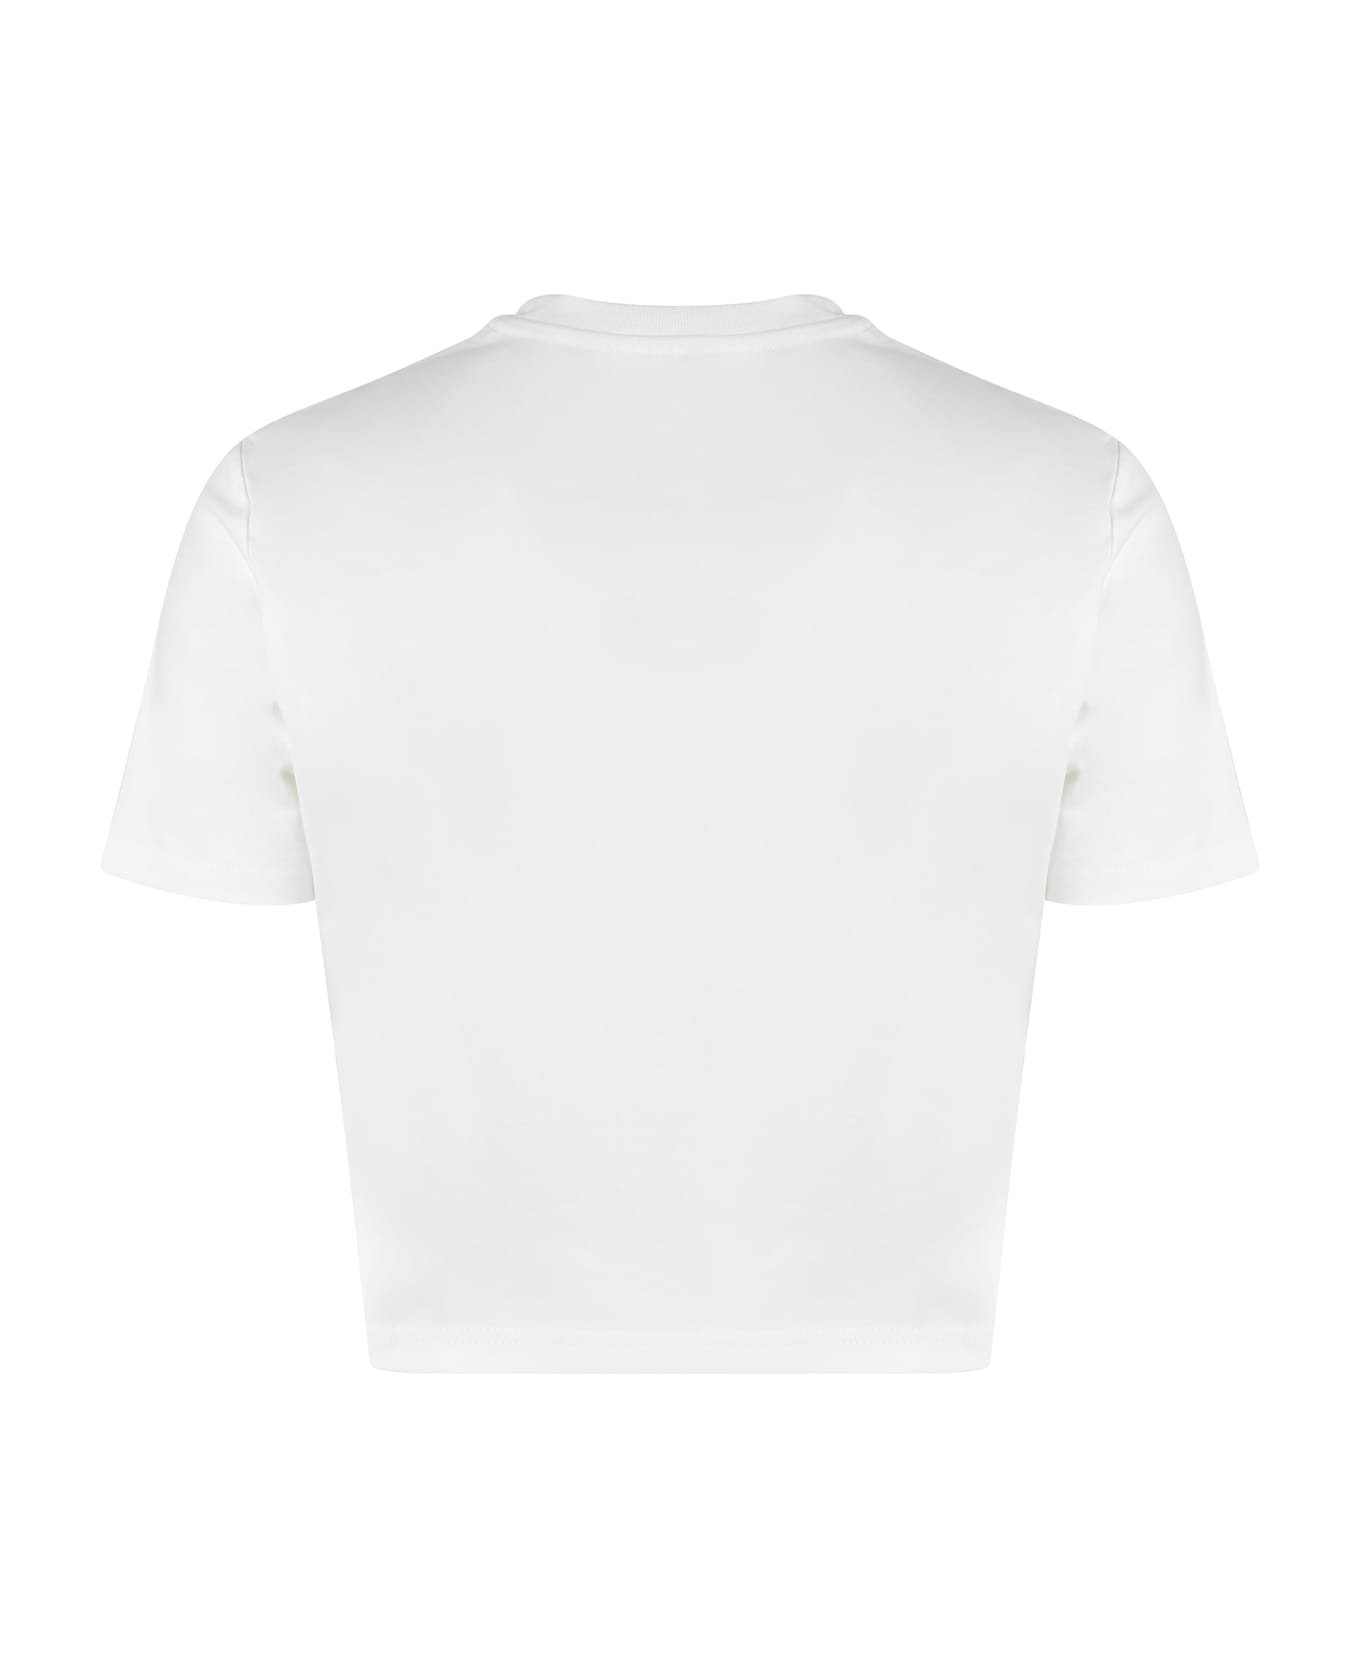 Dickies Maple Valley Printed Stretch Cotton T-shirt - White